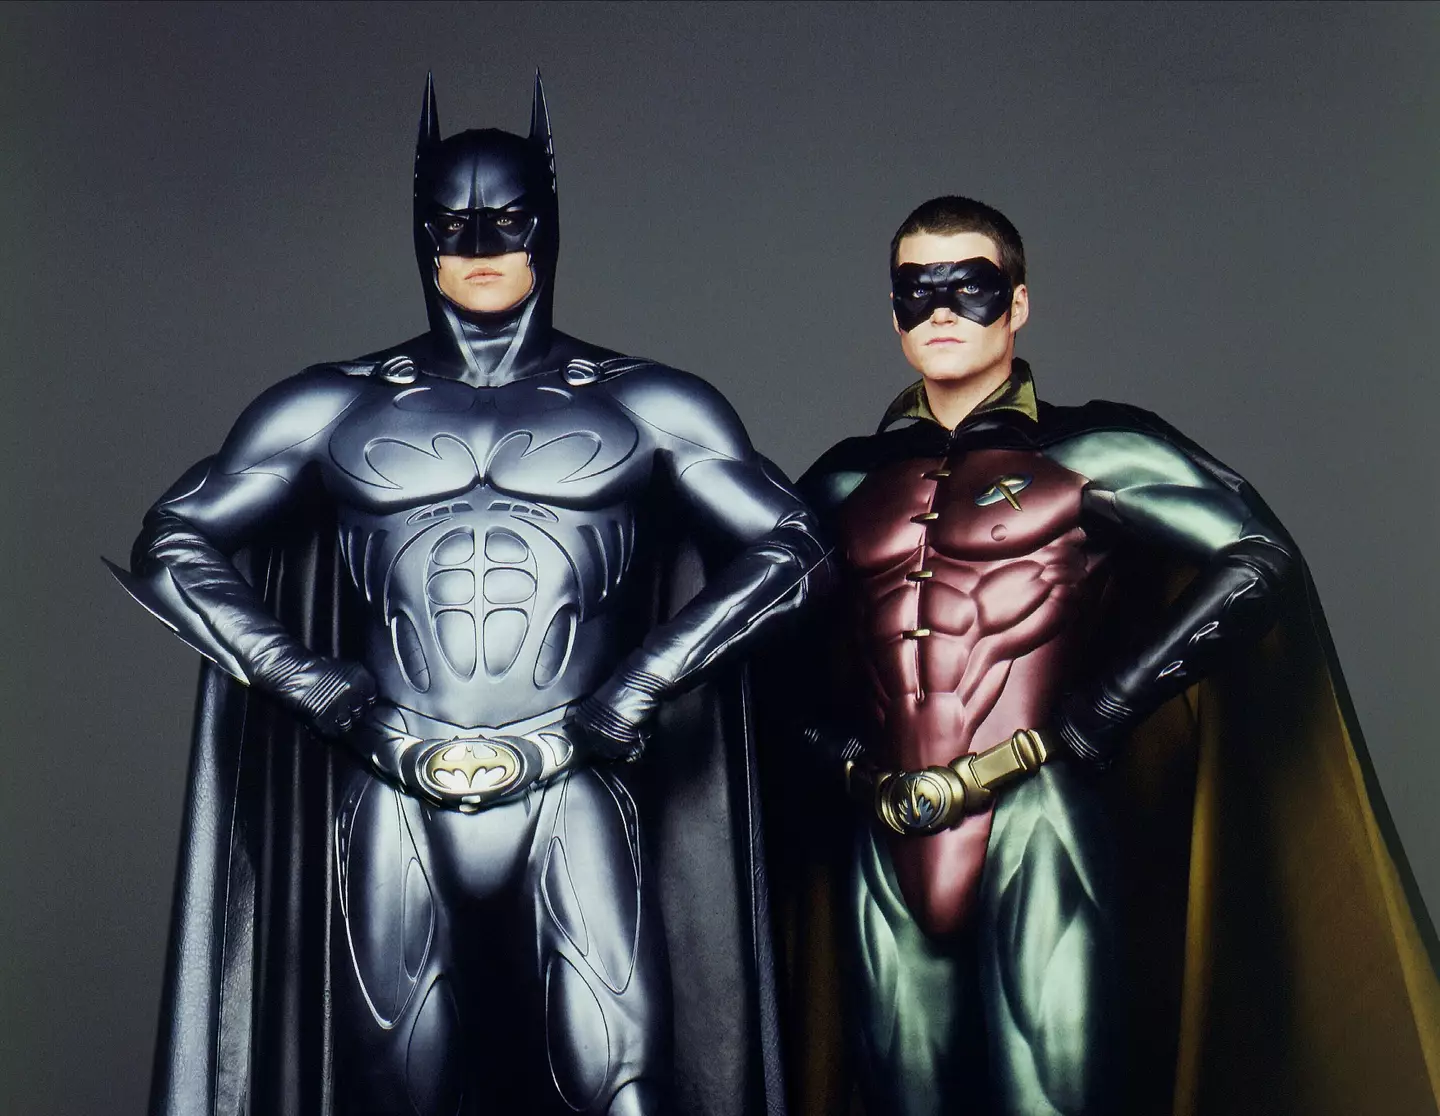 Val Kilmer and Chris O'Donnell as Batman and Robin in Batman Forever.